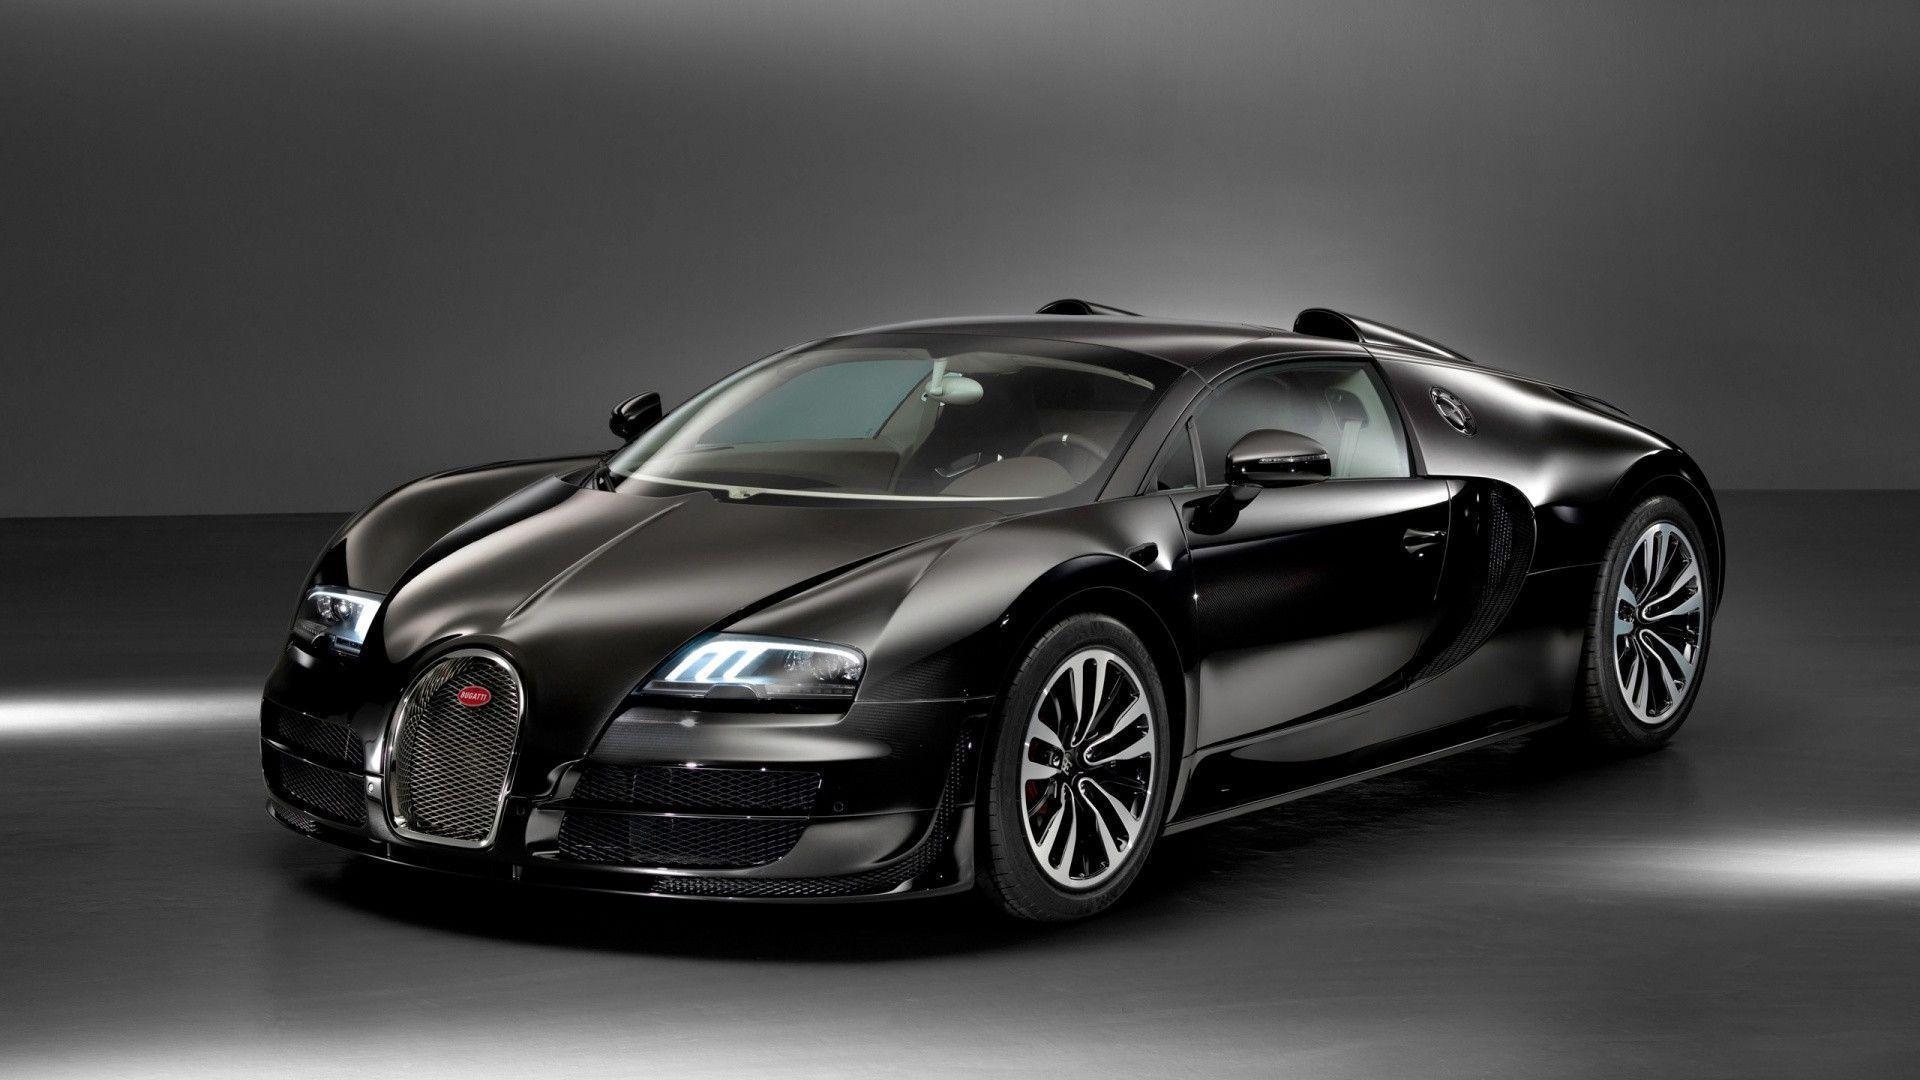 Bugatti Veyron Hyper Sport Backgrounds And Wallpapers For